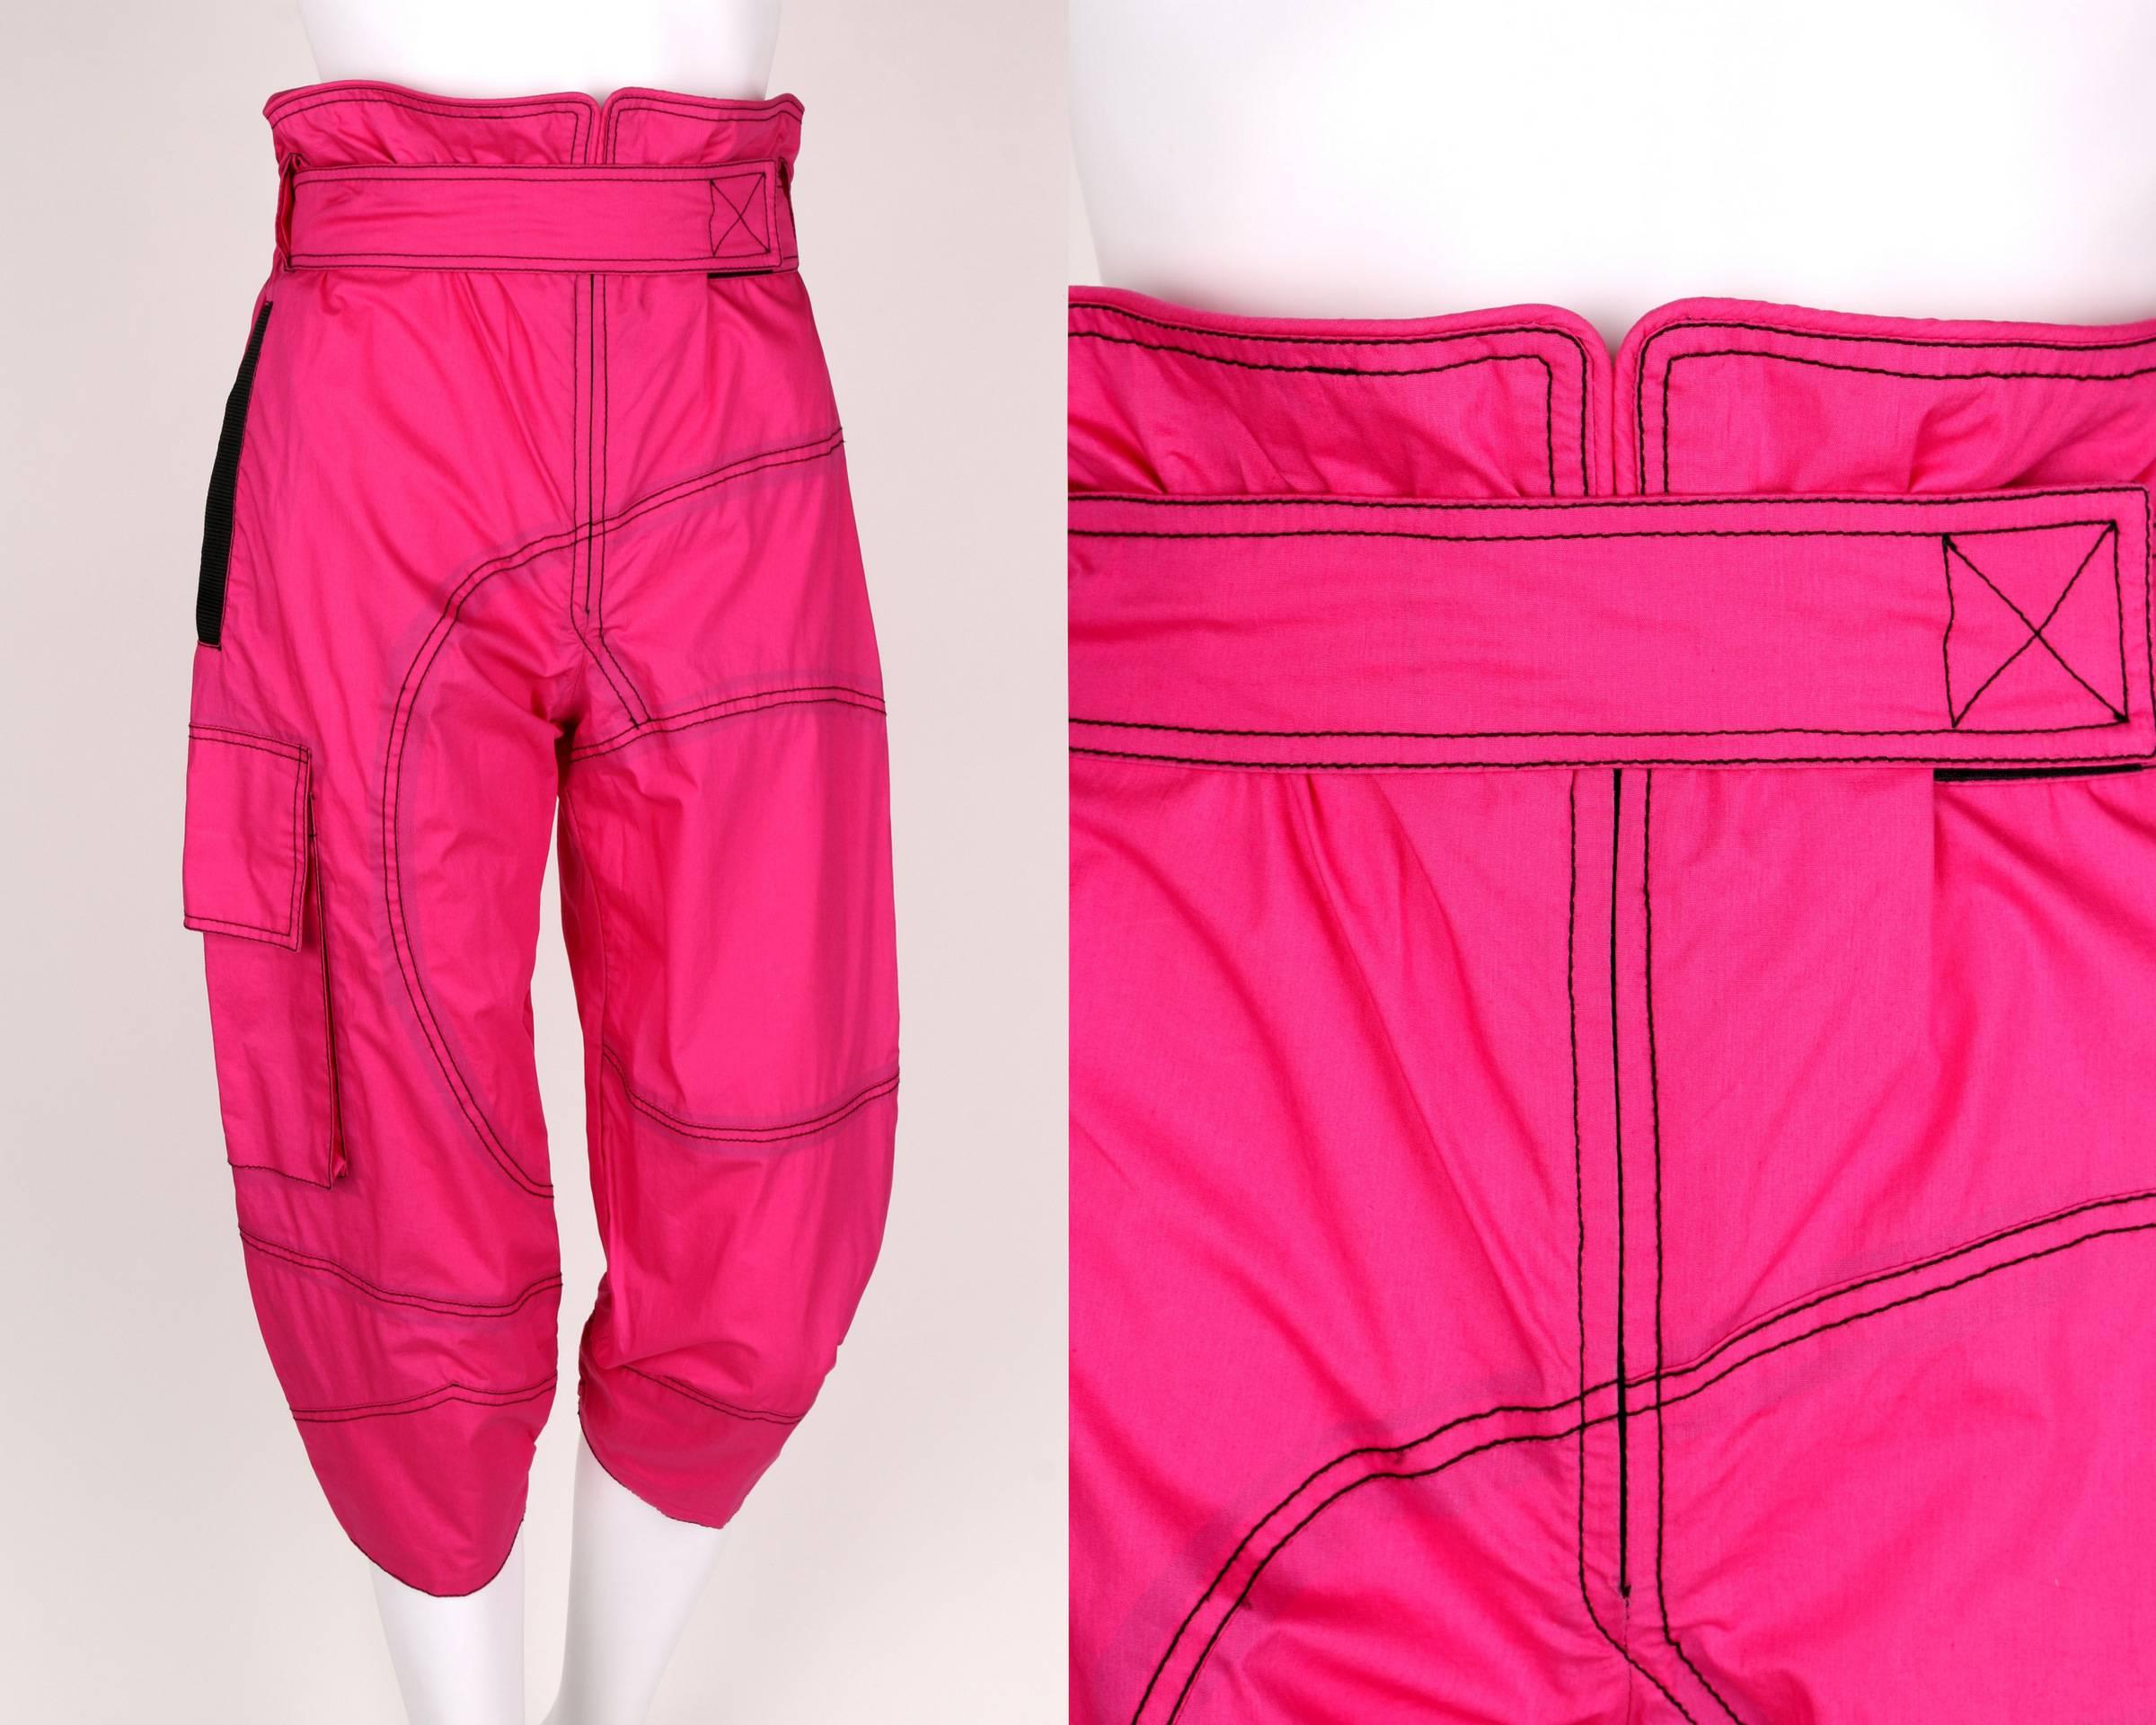 Emilio Pucci bright pink high-waisted windbreaker capris. Fabric belt at front with velcro closure. Elastic waistline at back. Center front zip fly. Large patch pocket with flap at right side. Right inseam hip pocket with black nylon webbing detail